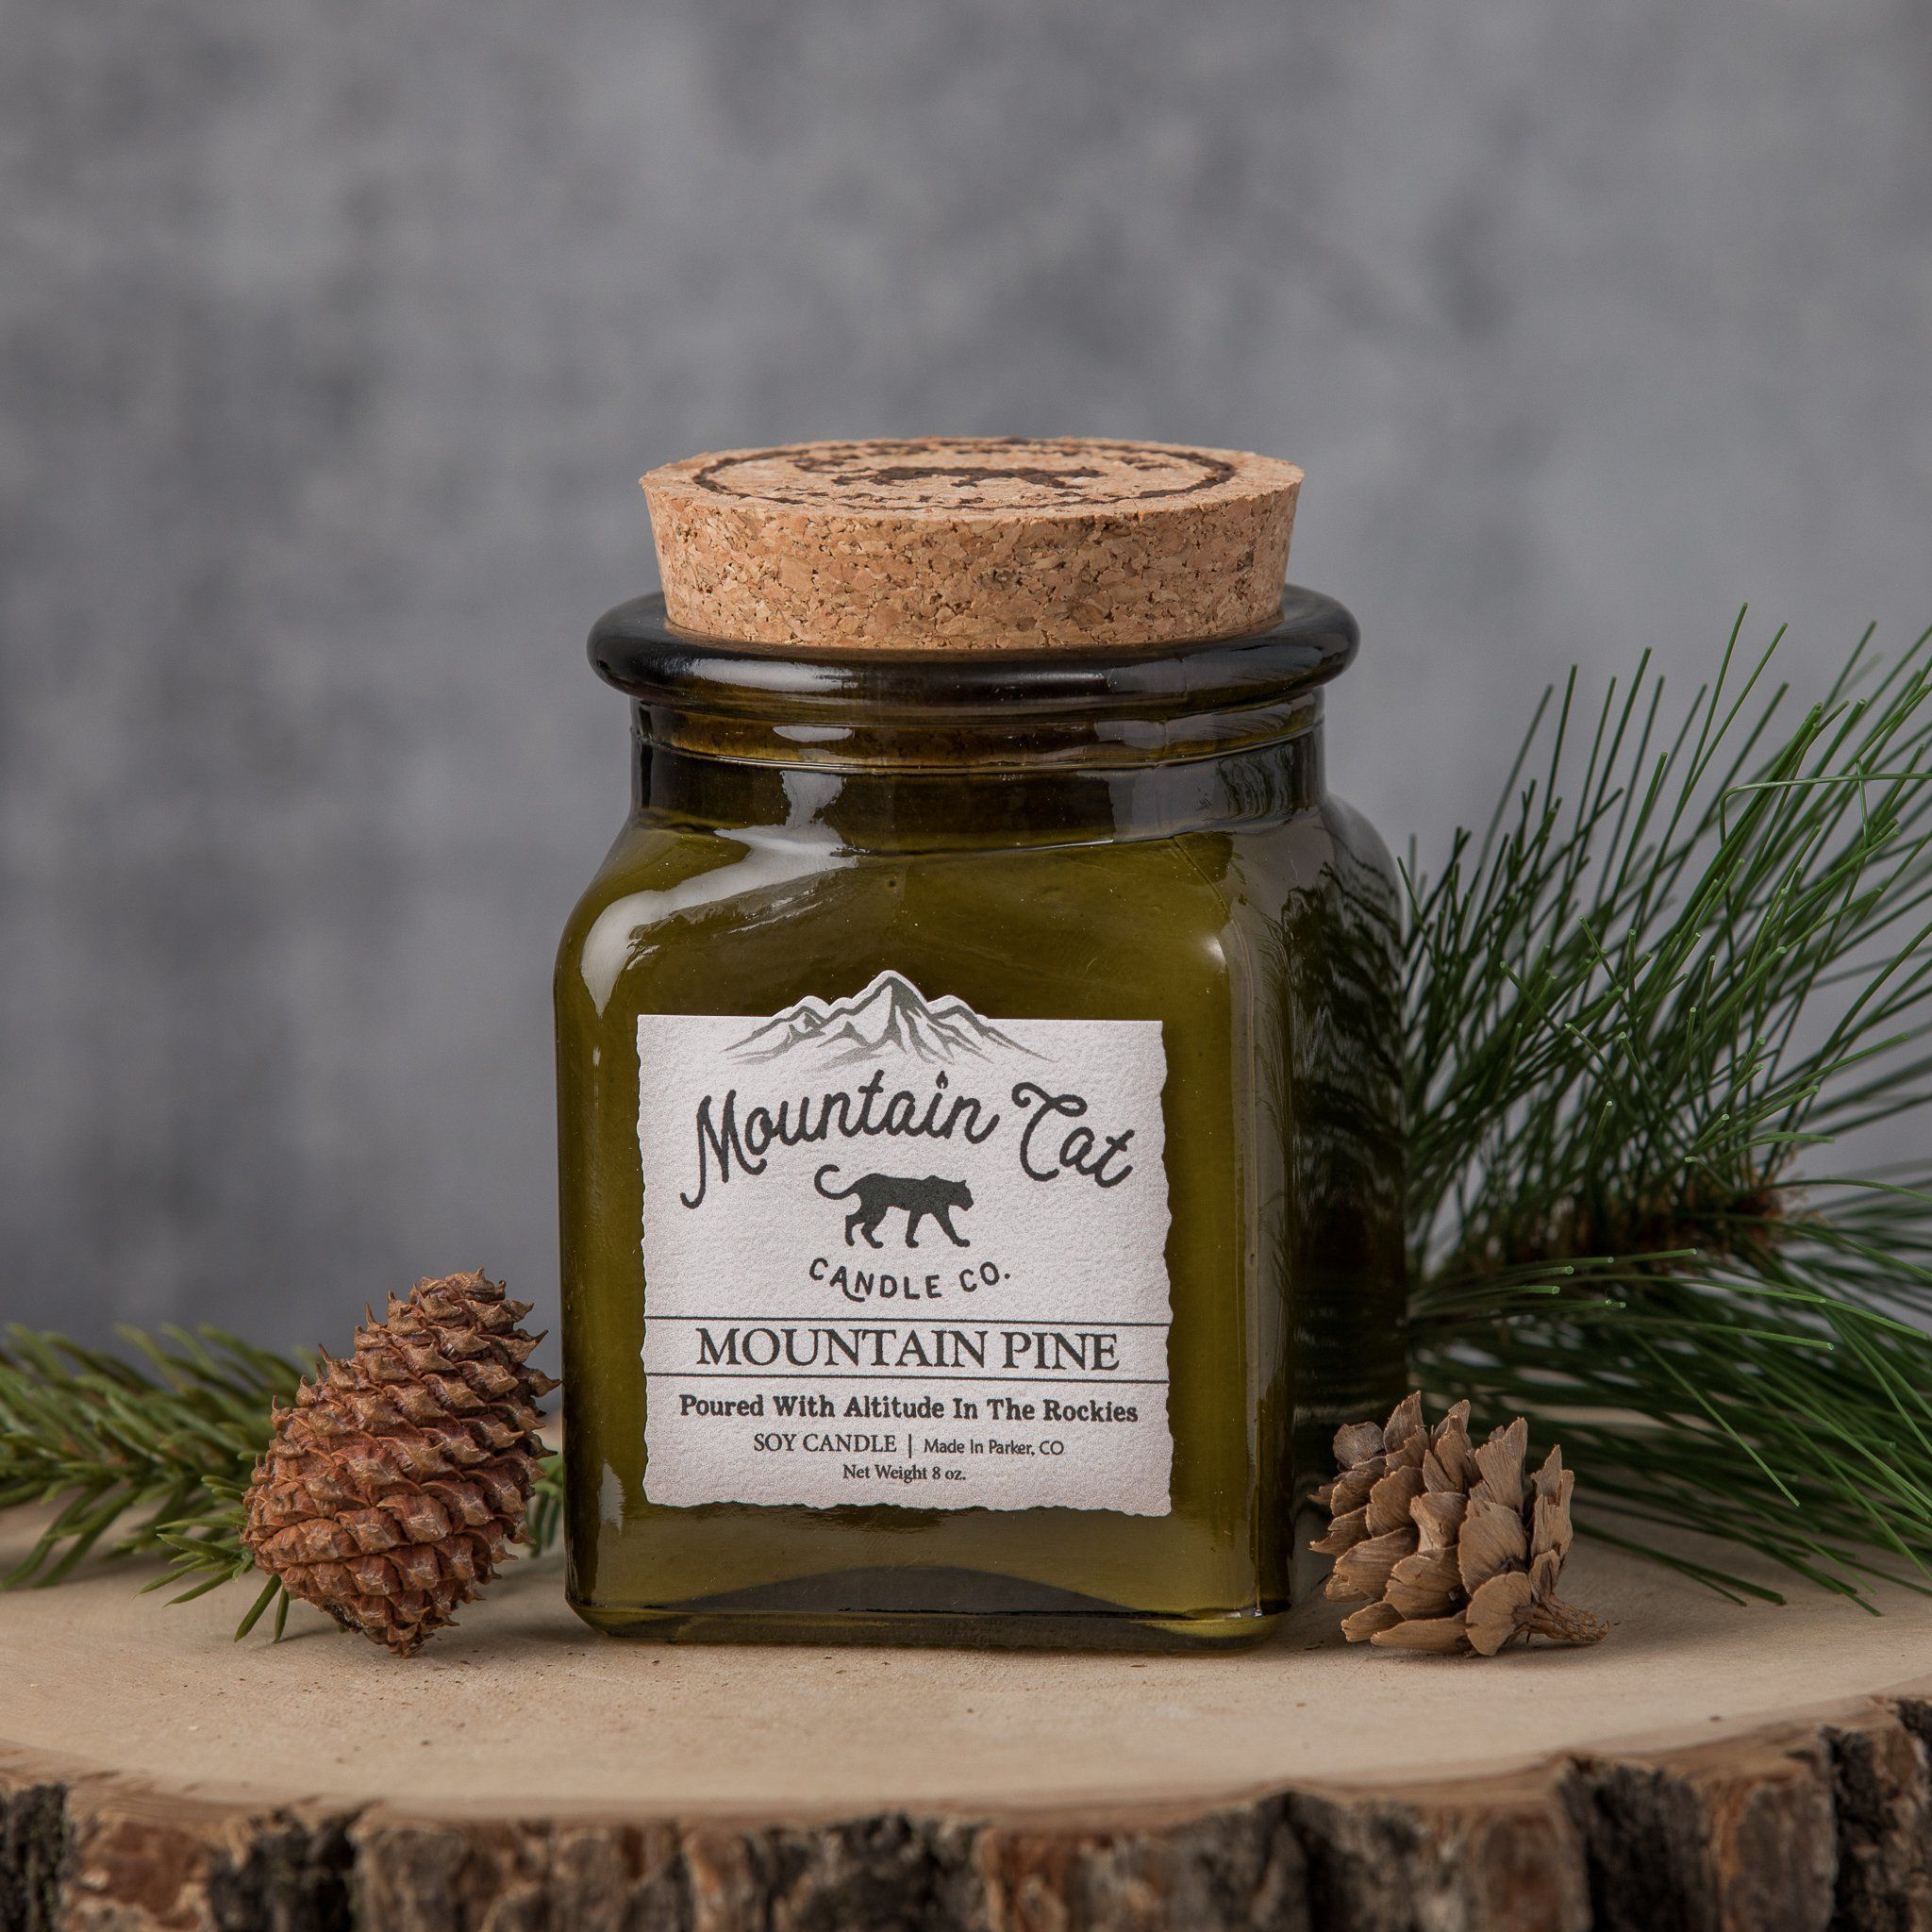 Mountain Pine - Rustic Cabin Collection Candles Mountain Cat Candle Co Vintage Green Jar with Cork Lid 